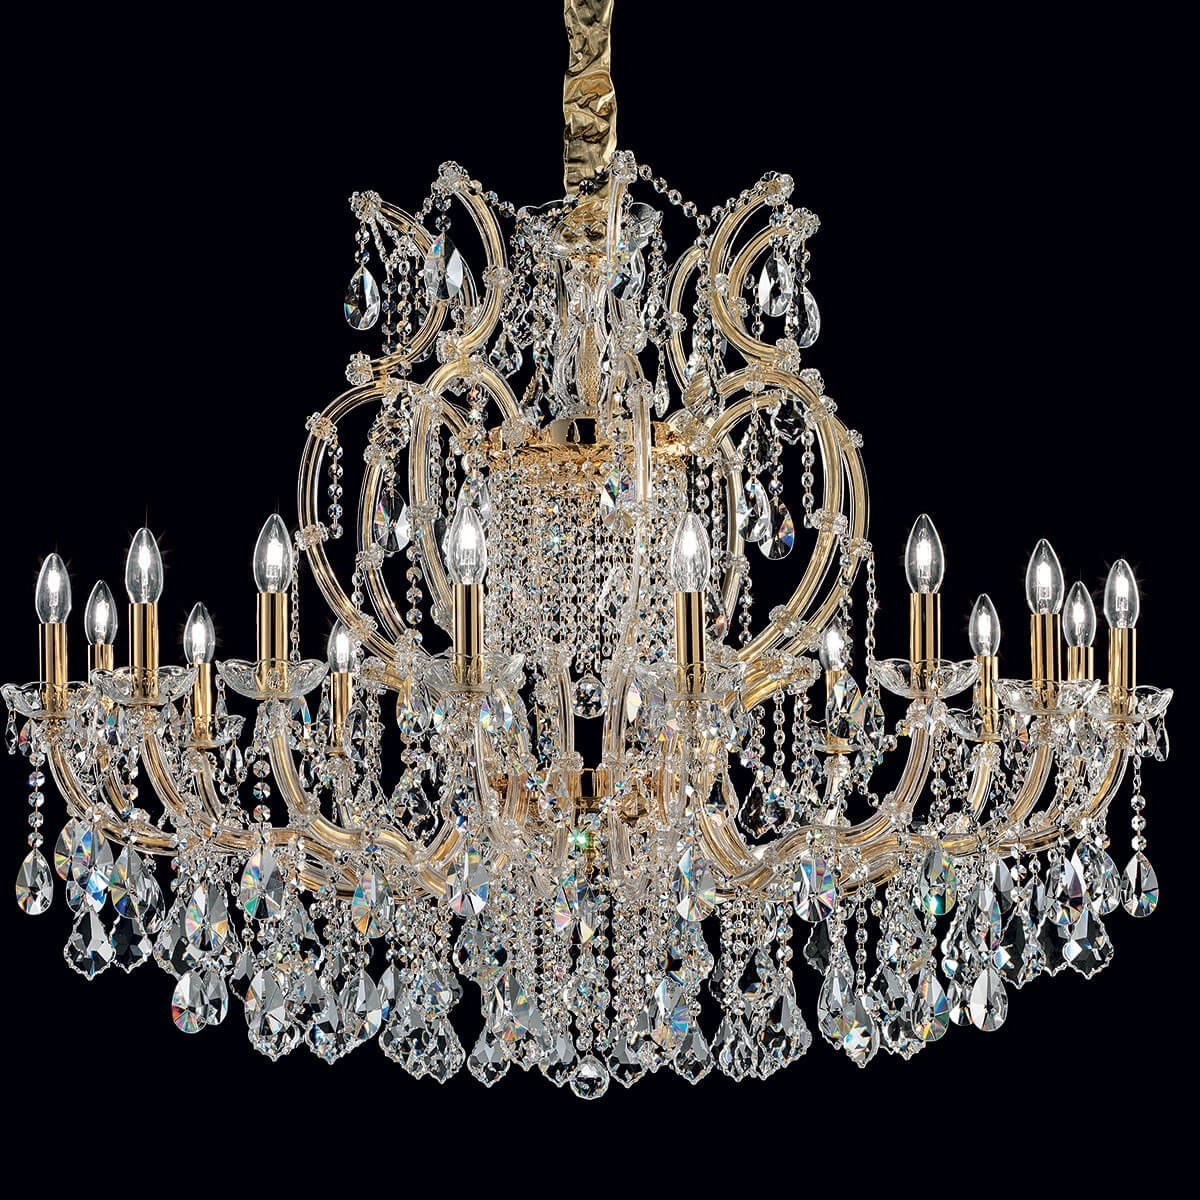 Large maria theresa chandeliers for ballroom